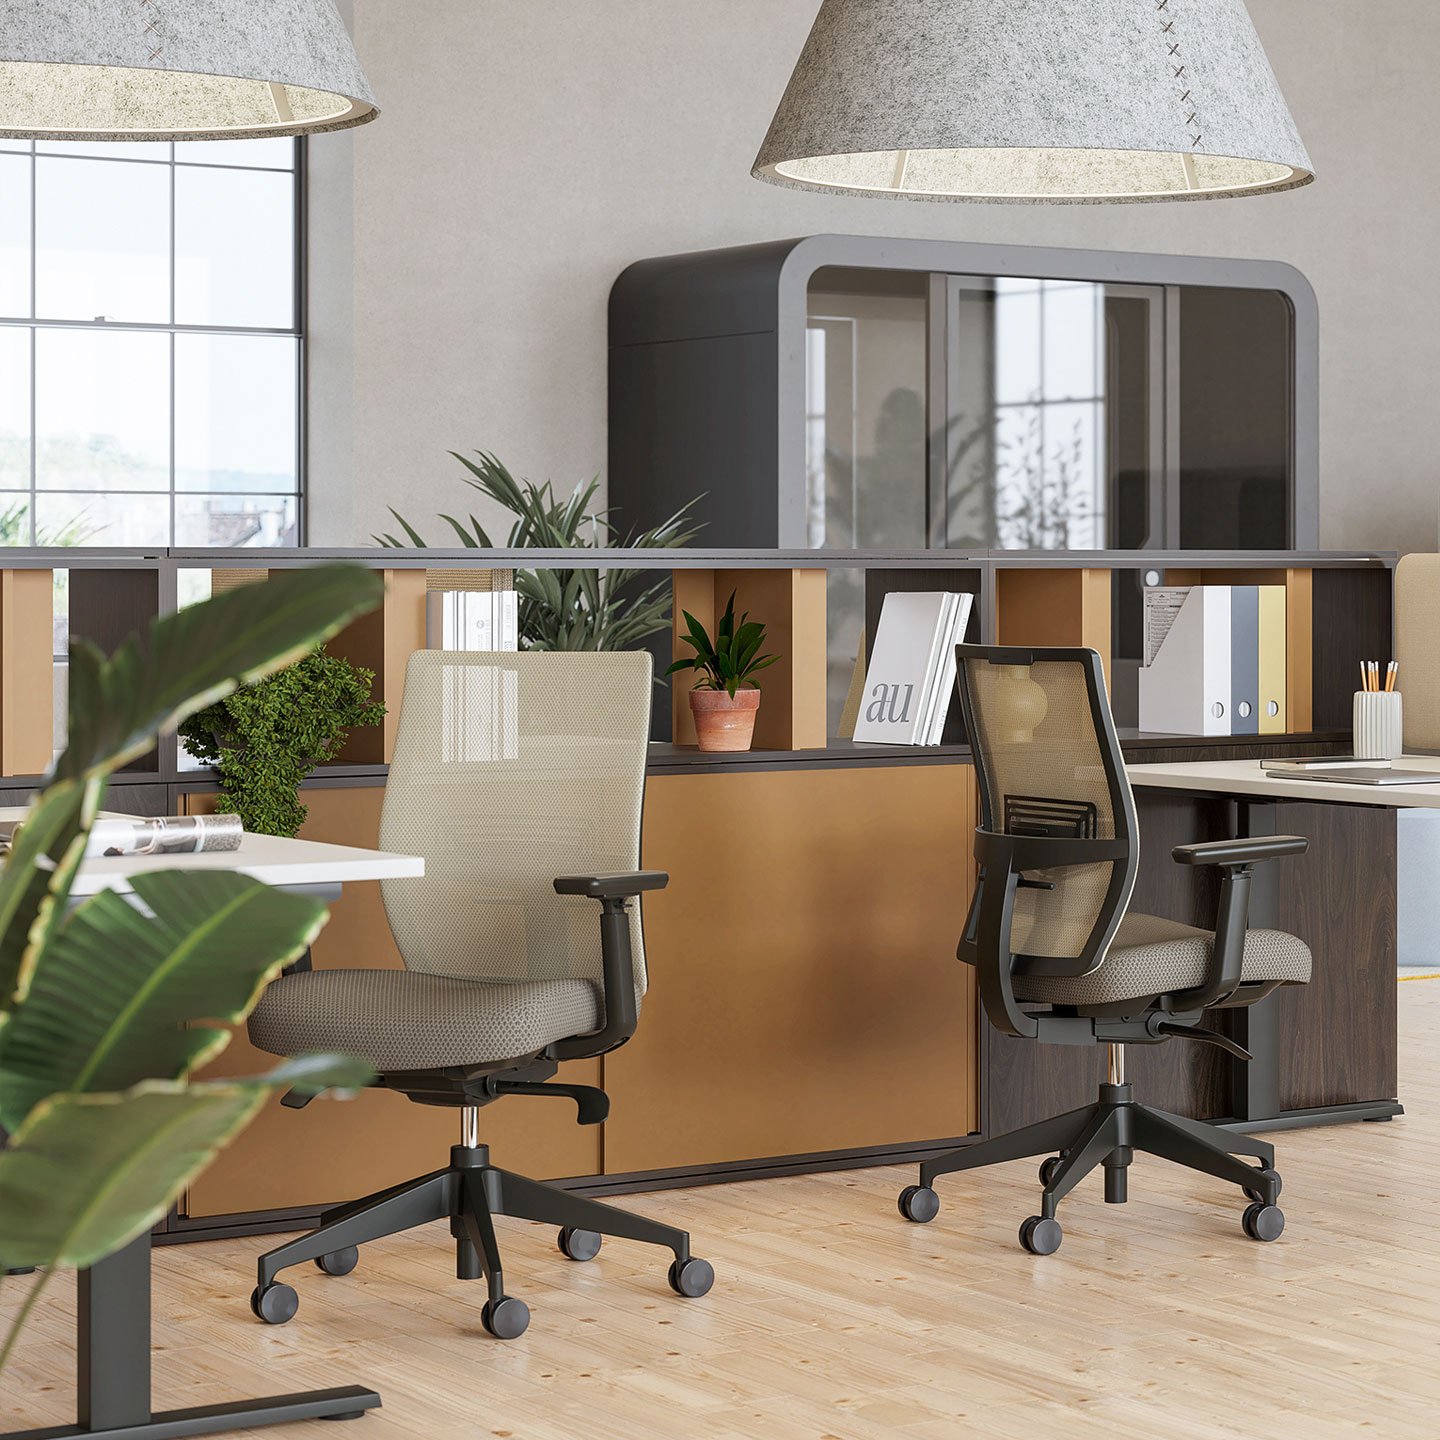 Aloha Active office chair in a workplace setting